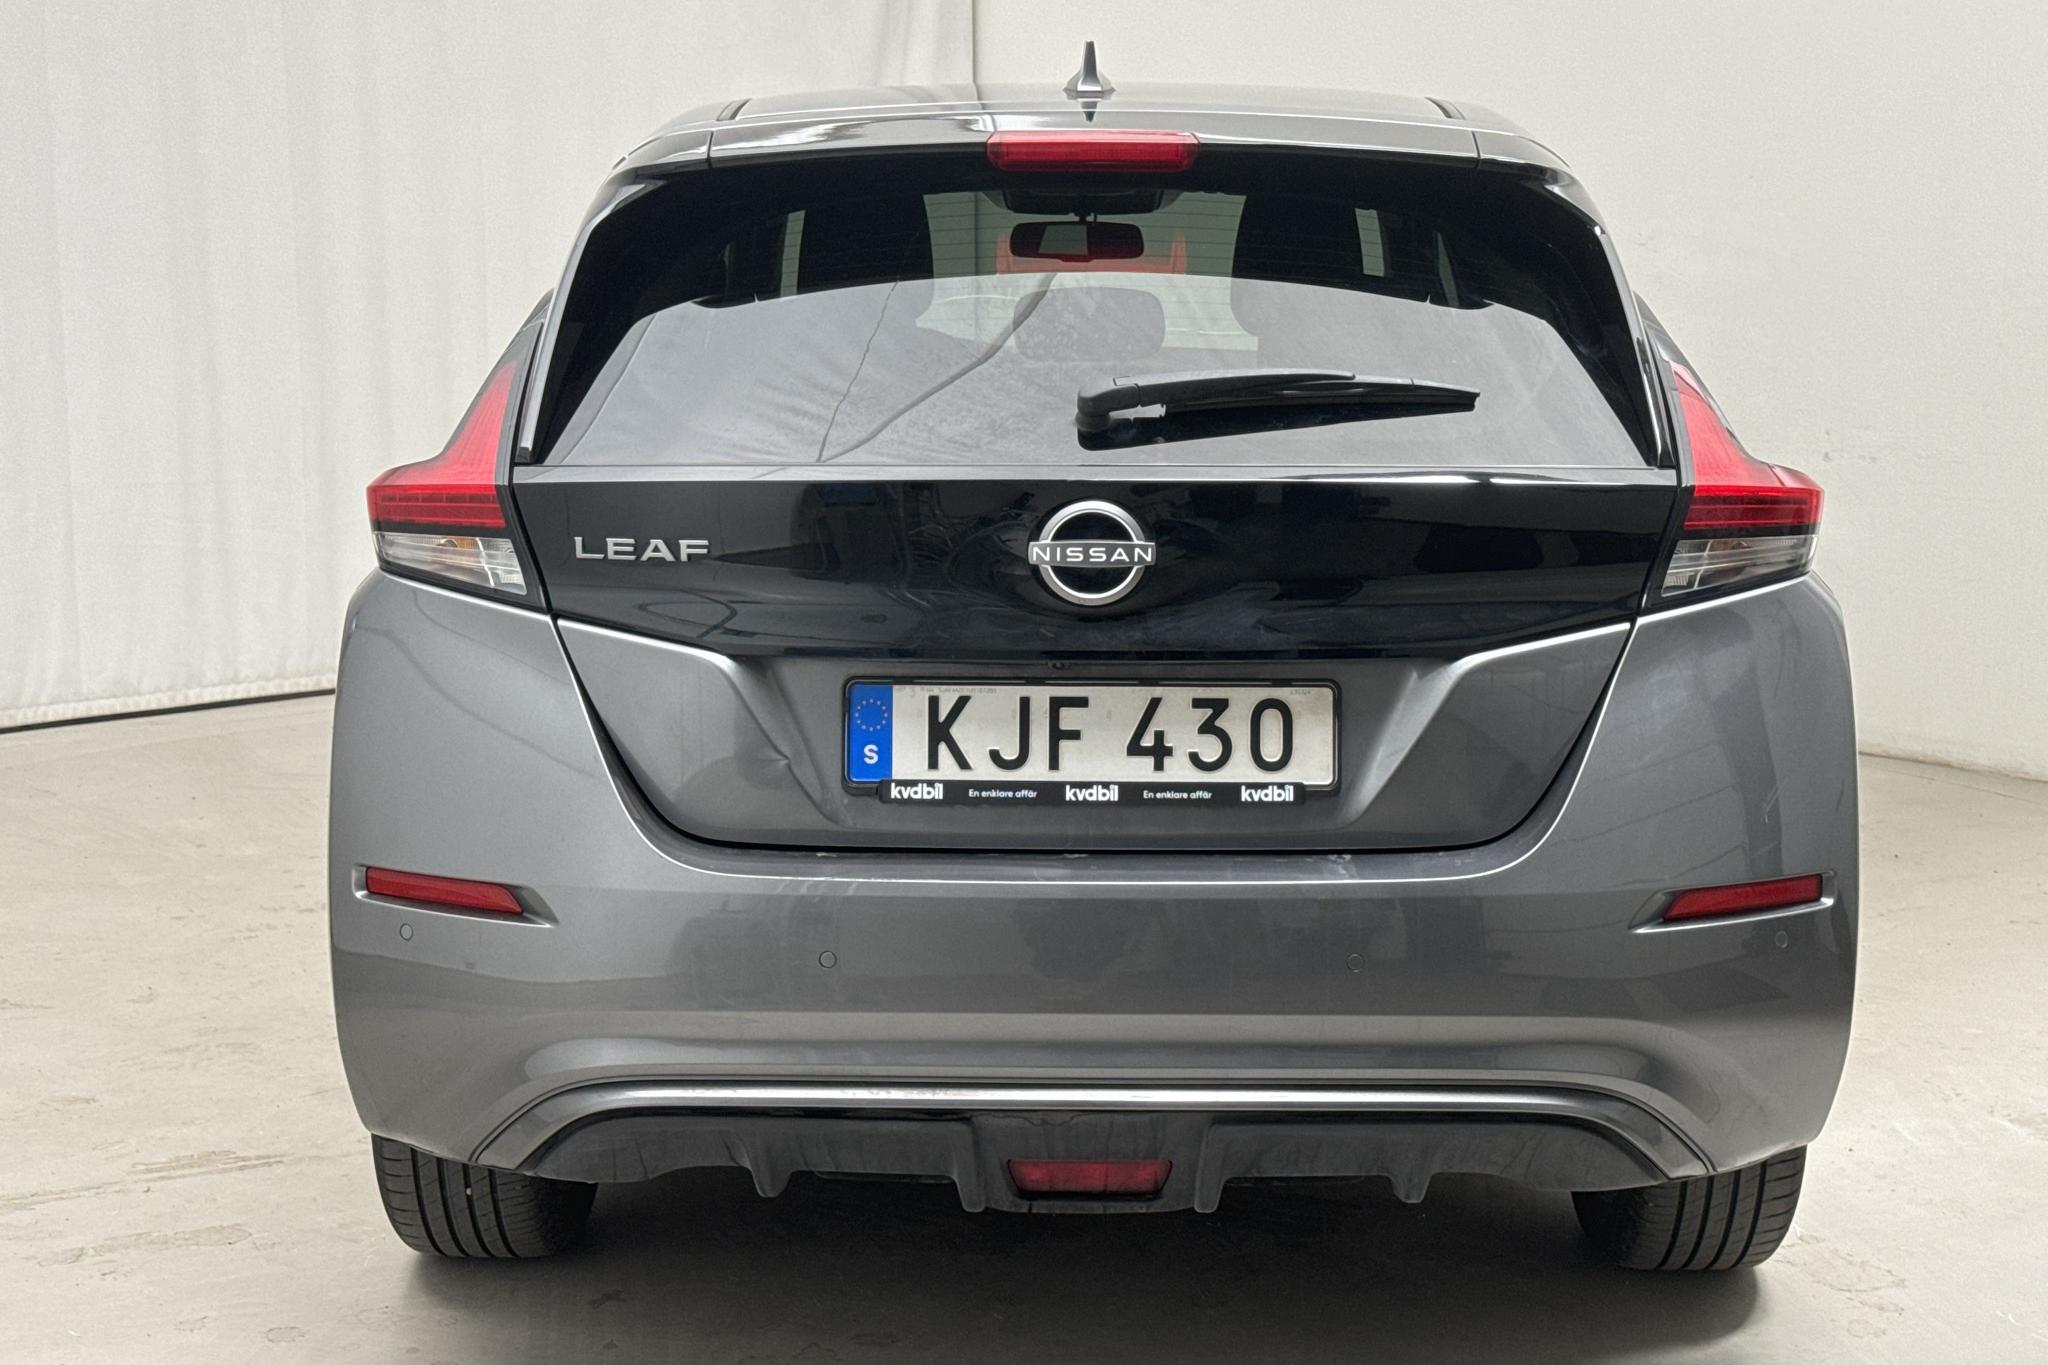 Nissan LEAF 5dr 39 kWh (150hk) - 13 510 km - Automatic - gray - 2023